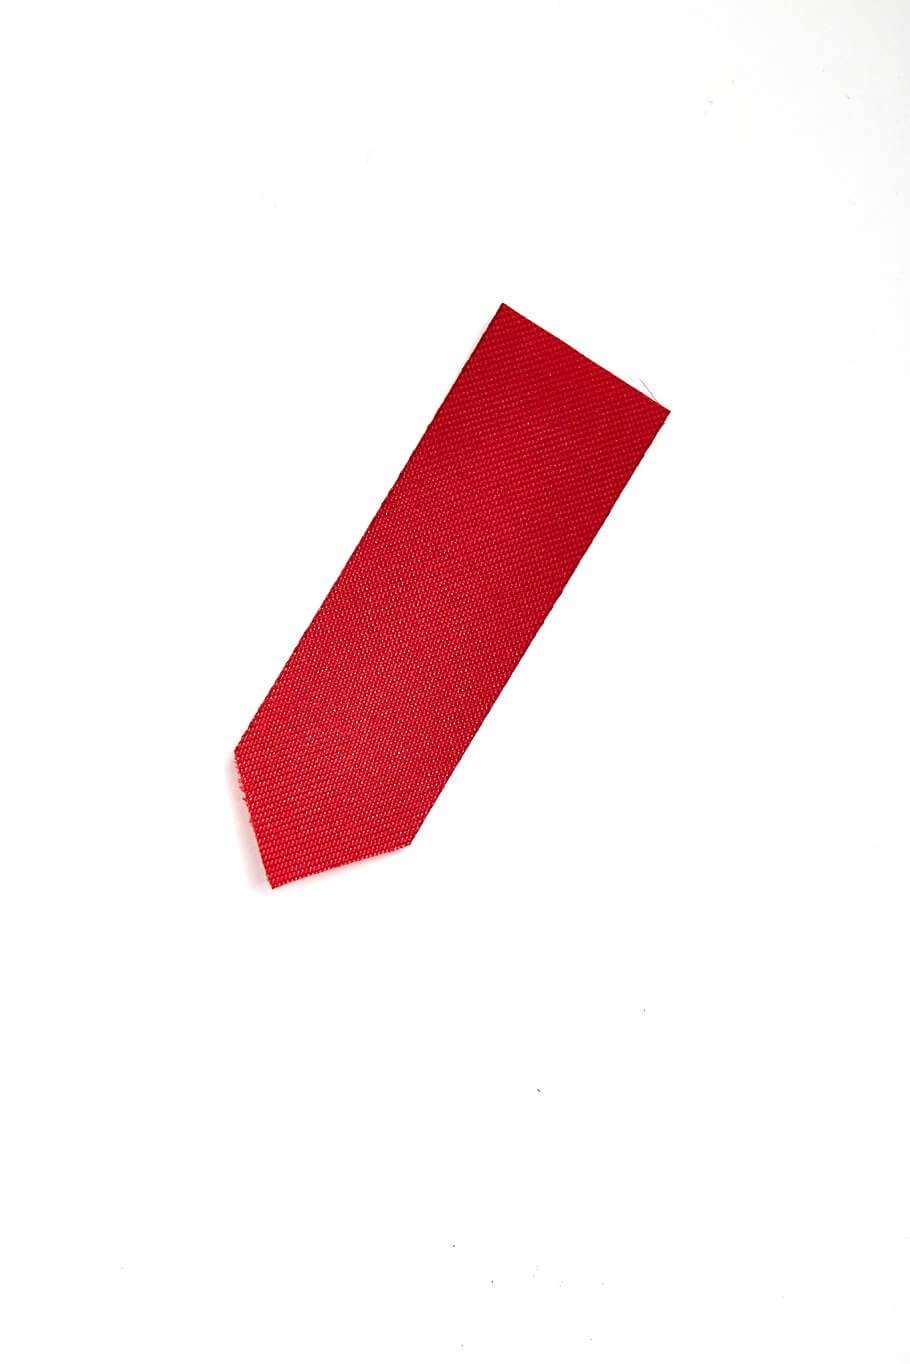 Red Tie Bookmarks Mockup PSD